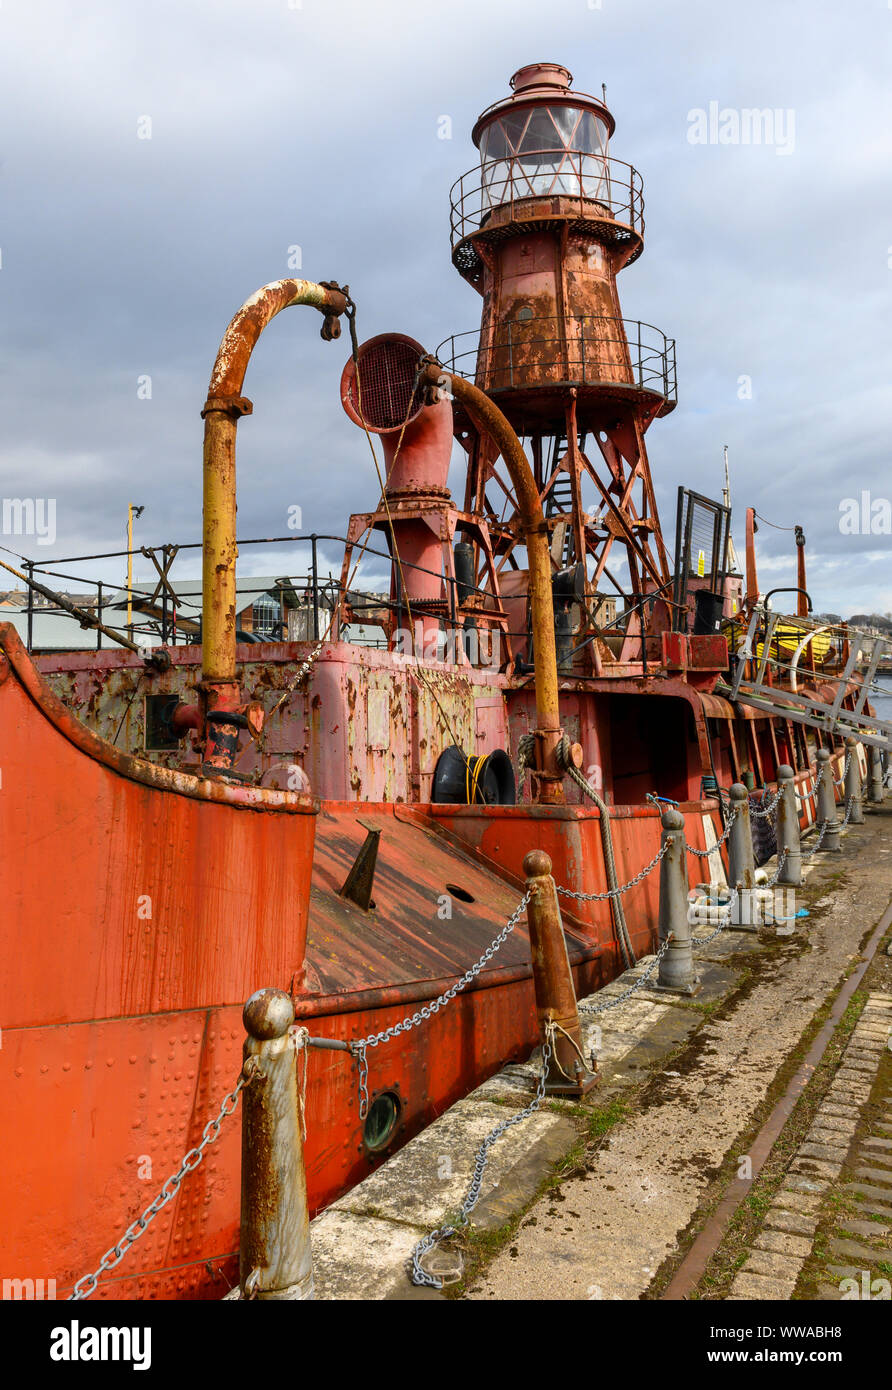 Detail of the lightship The North Carr, in service 1933 - 1975 moored at Victoria Dock, City Quay, Dundee, Tayside, Scotland, UK Stock Photo